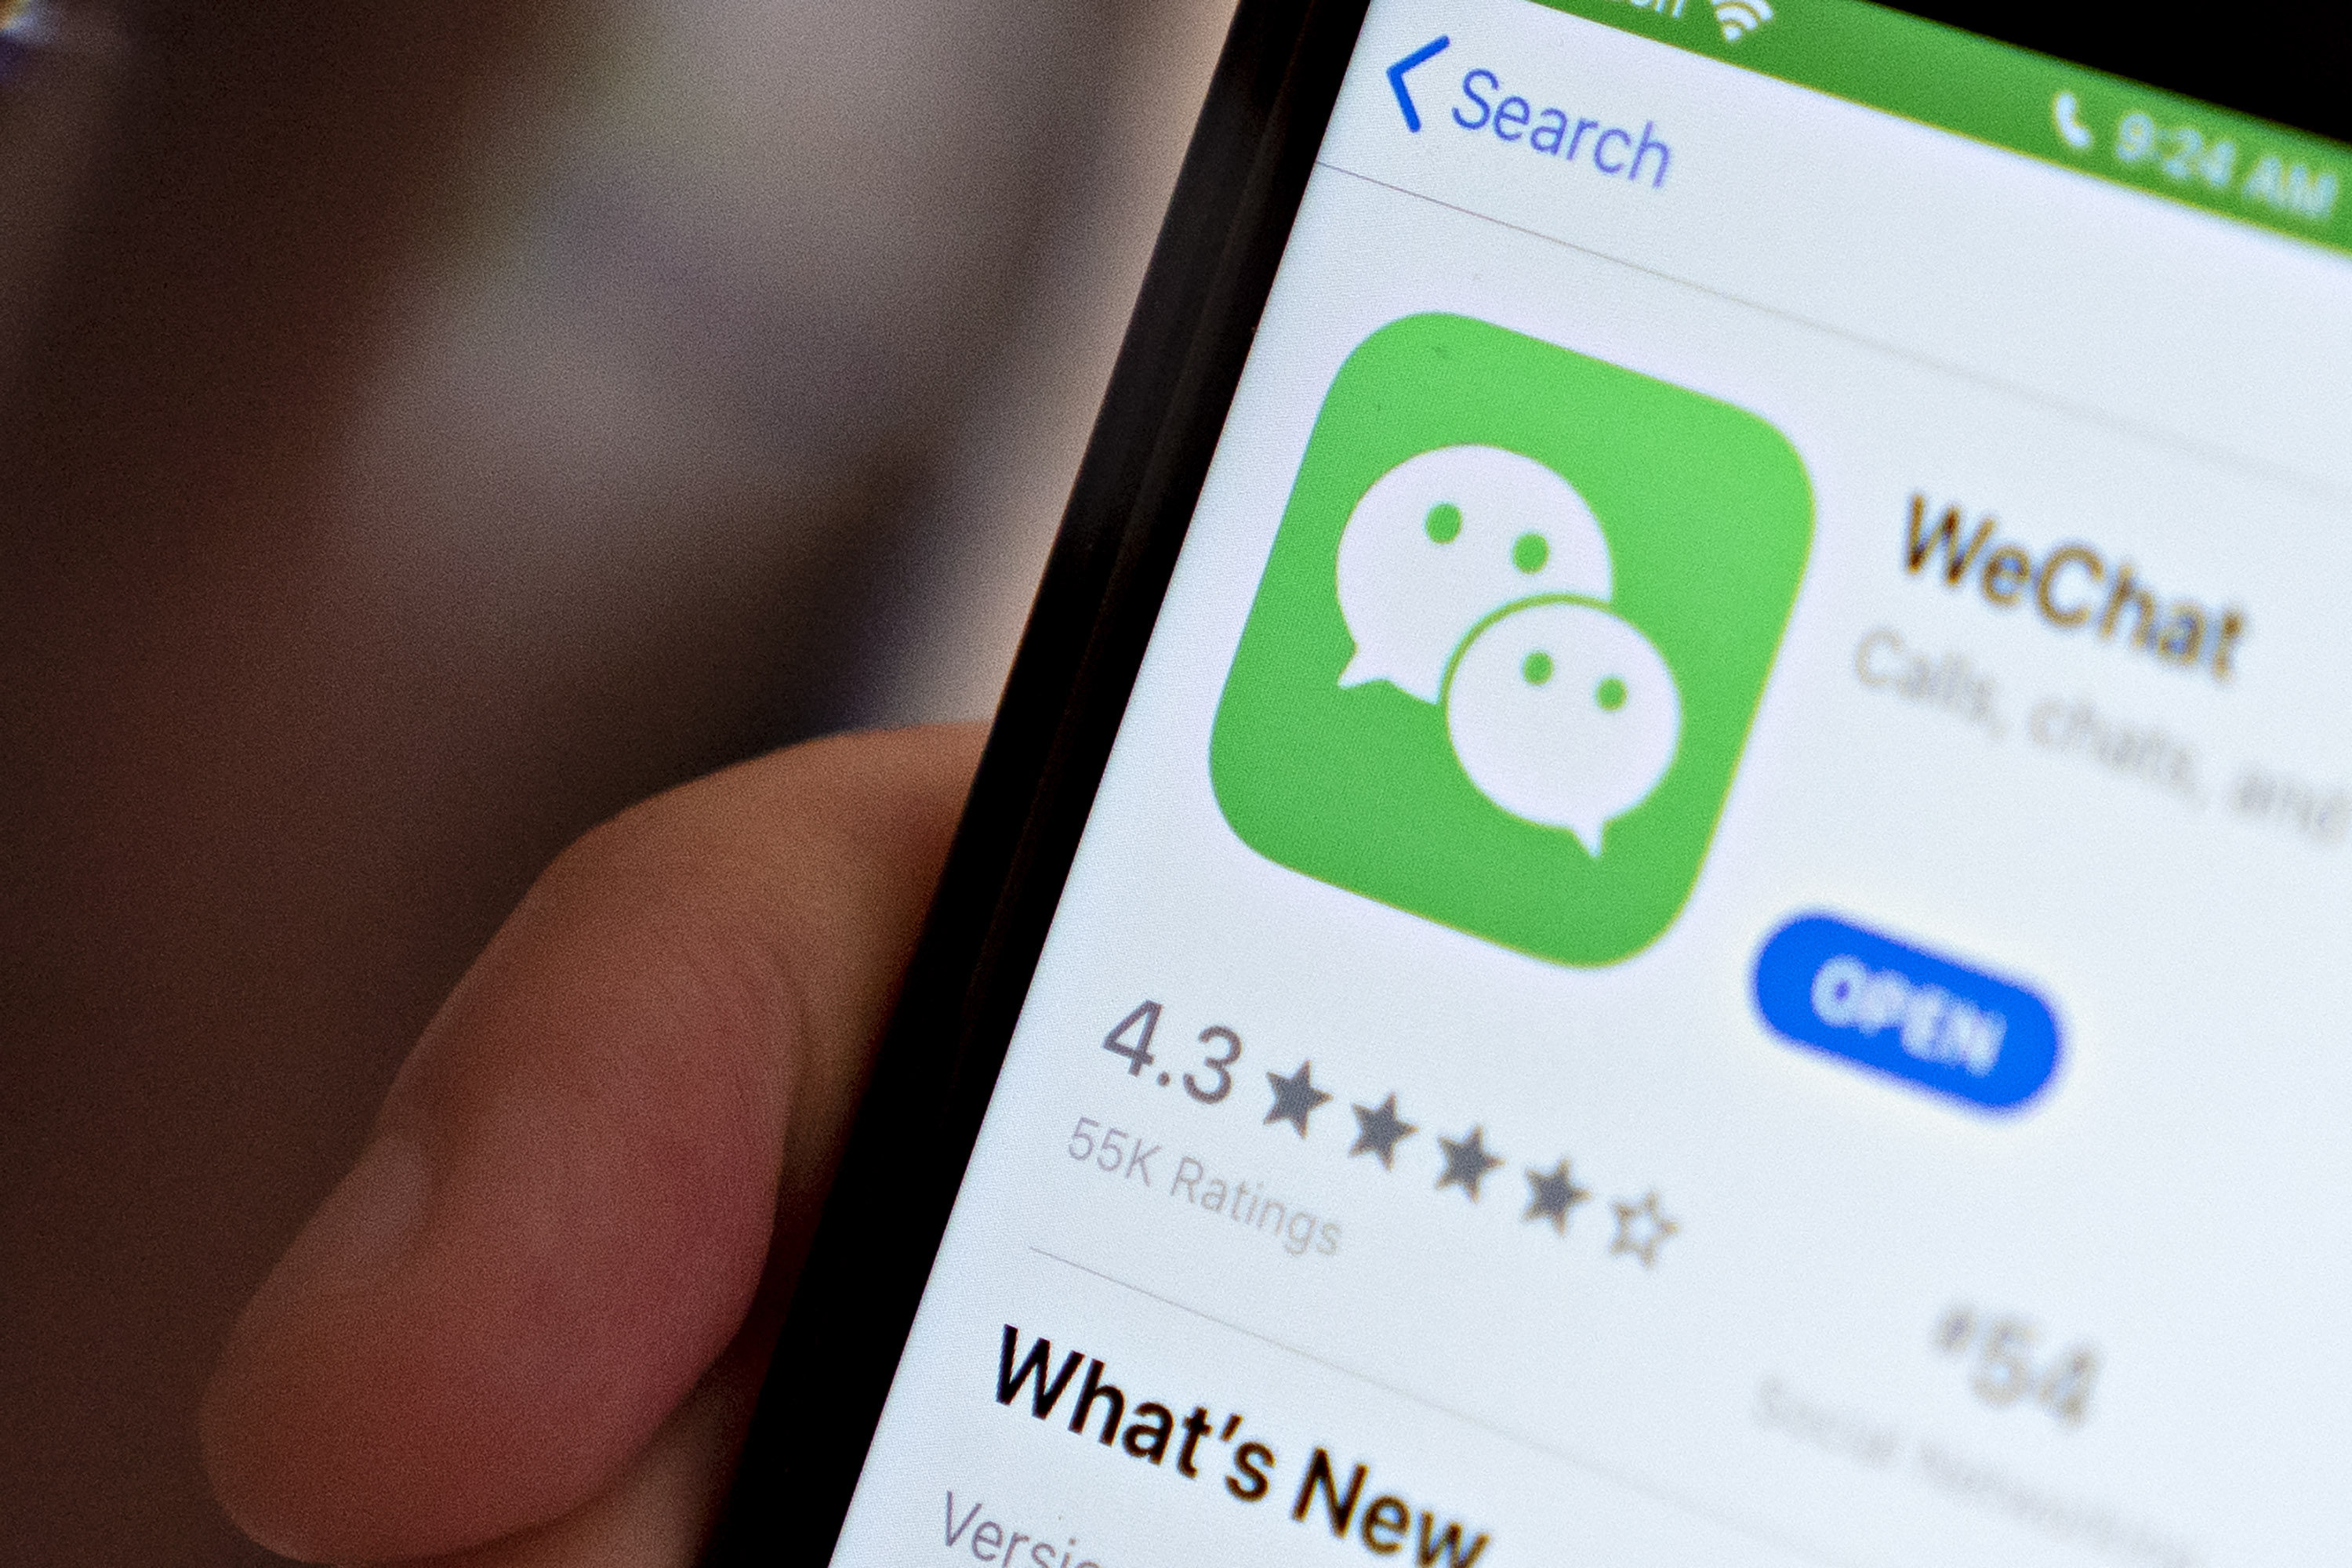 Tencent’s WeChat app displayed in Apple’s App Store on a smartphone on August 7, 2020. Photo: Bloomberg